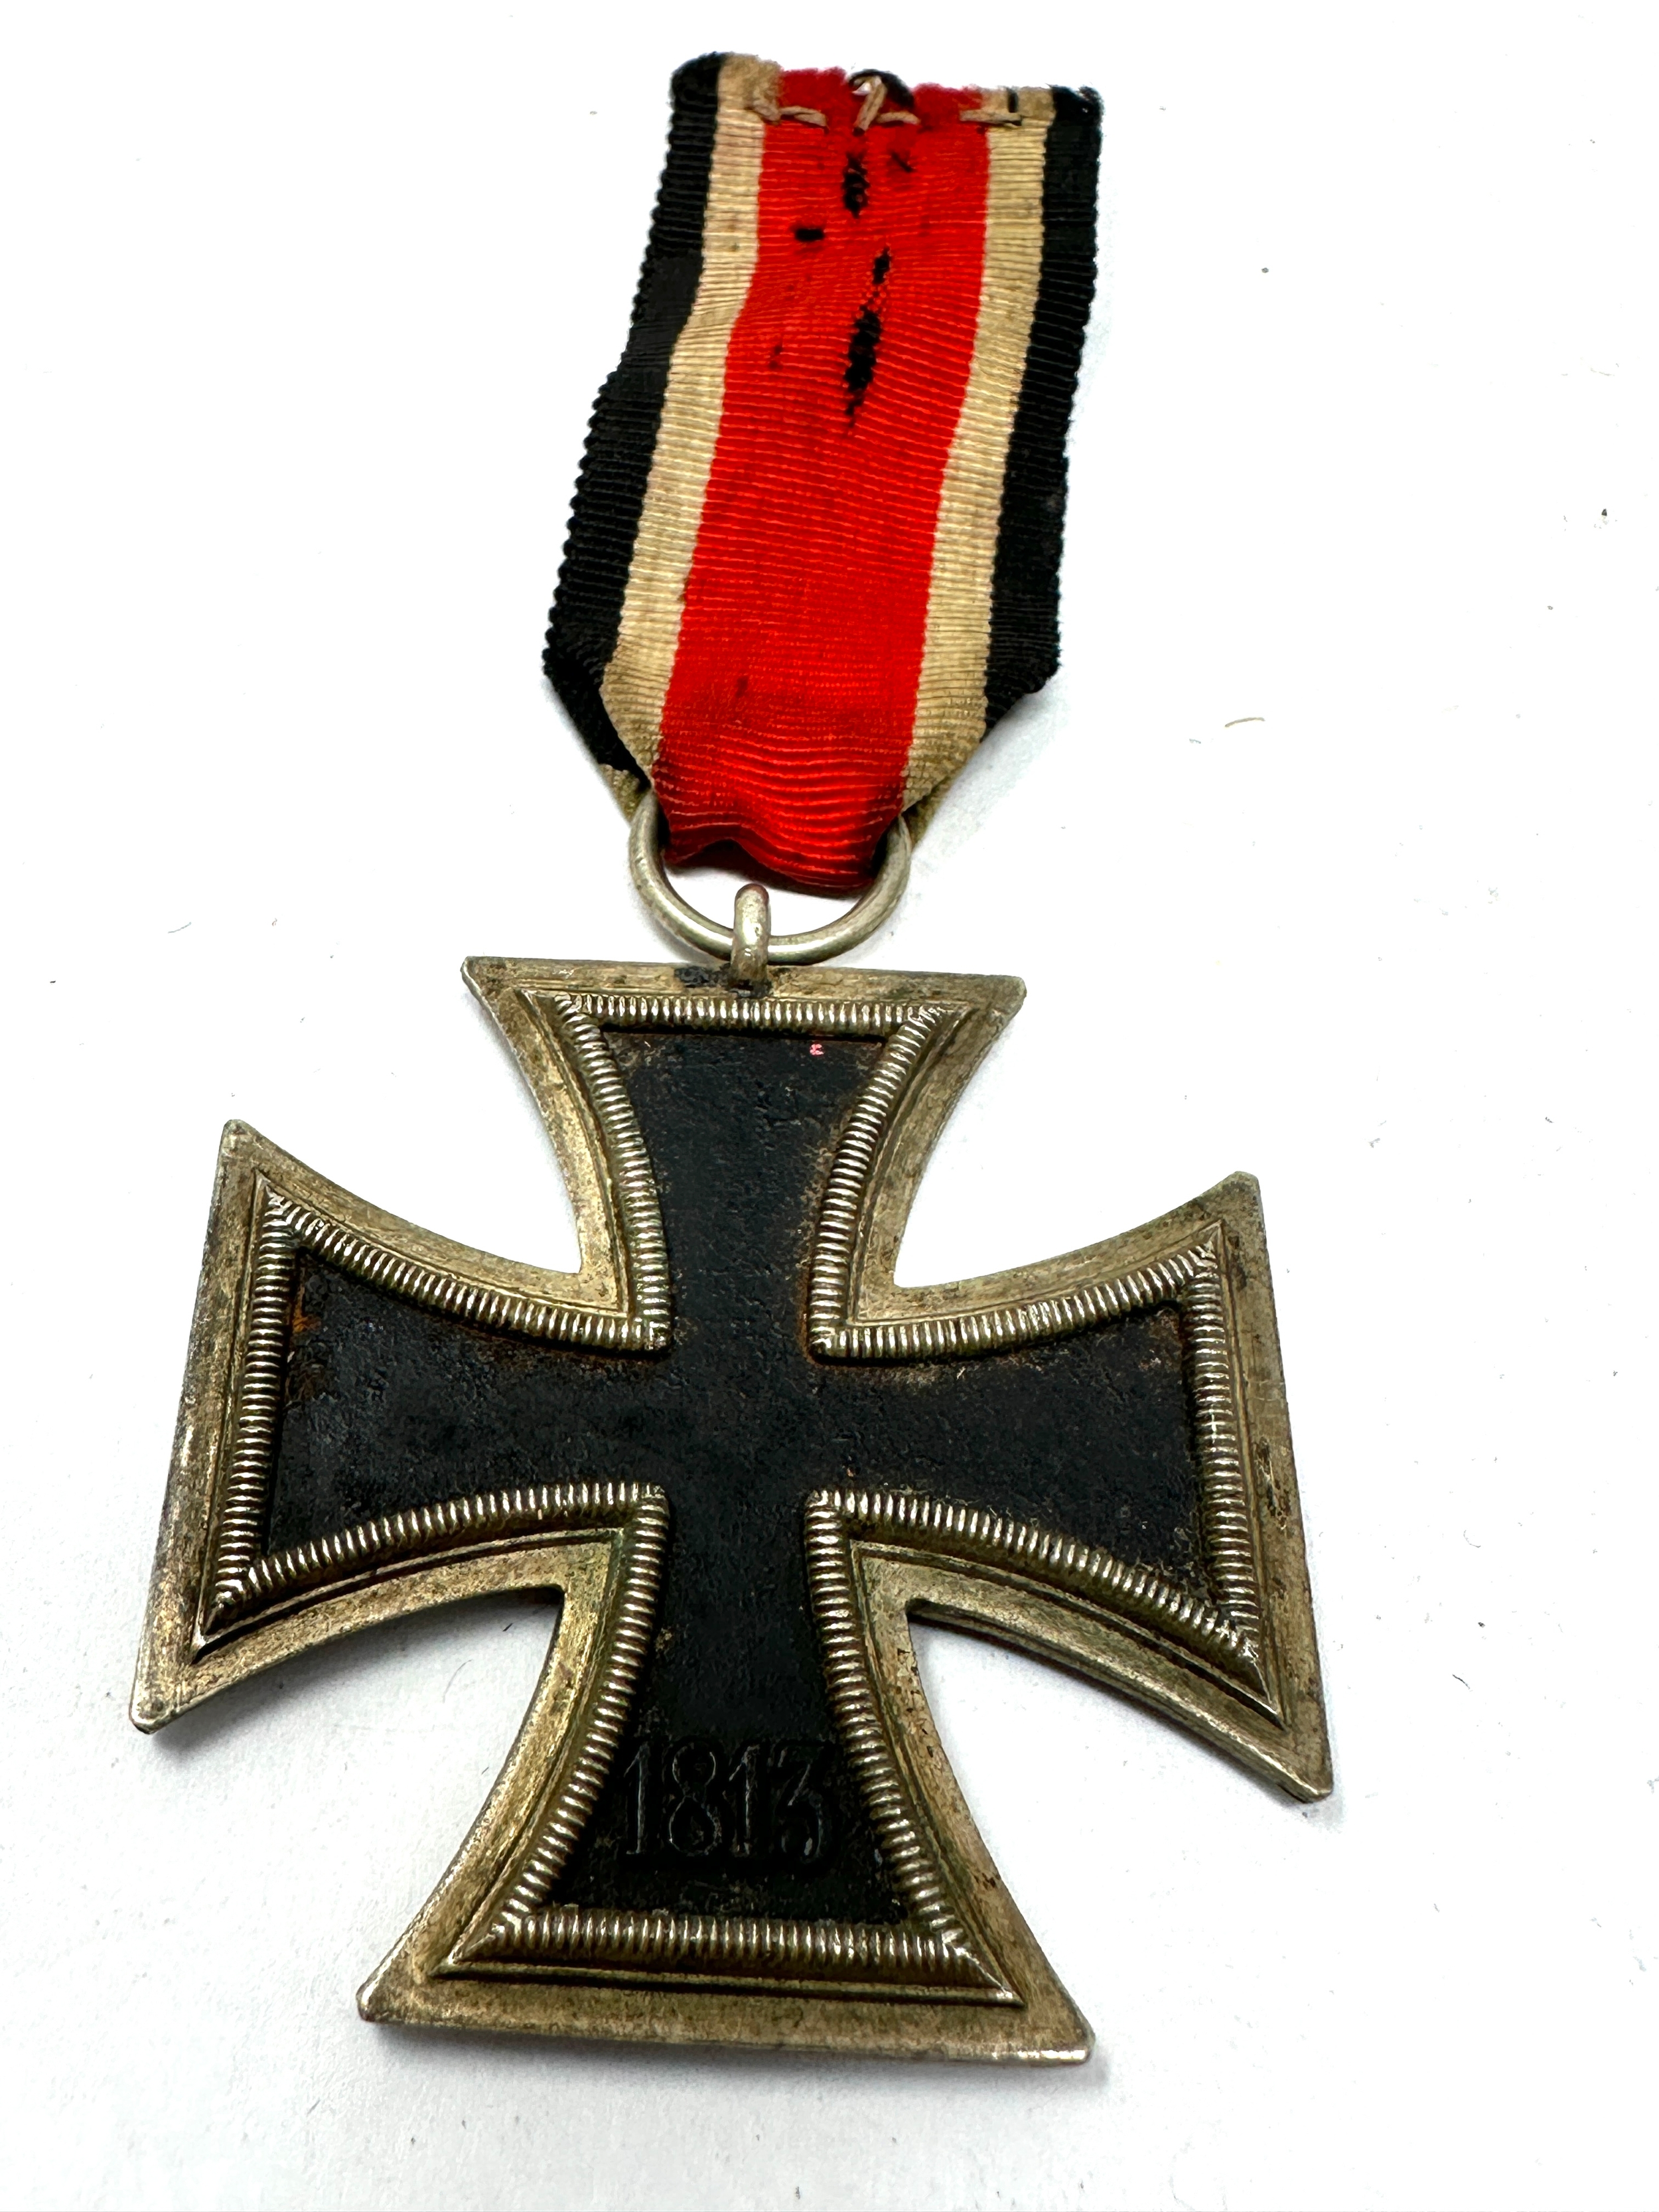 ww2 german iron cross 2nd class no ring stamp - Image 2 of 2